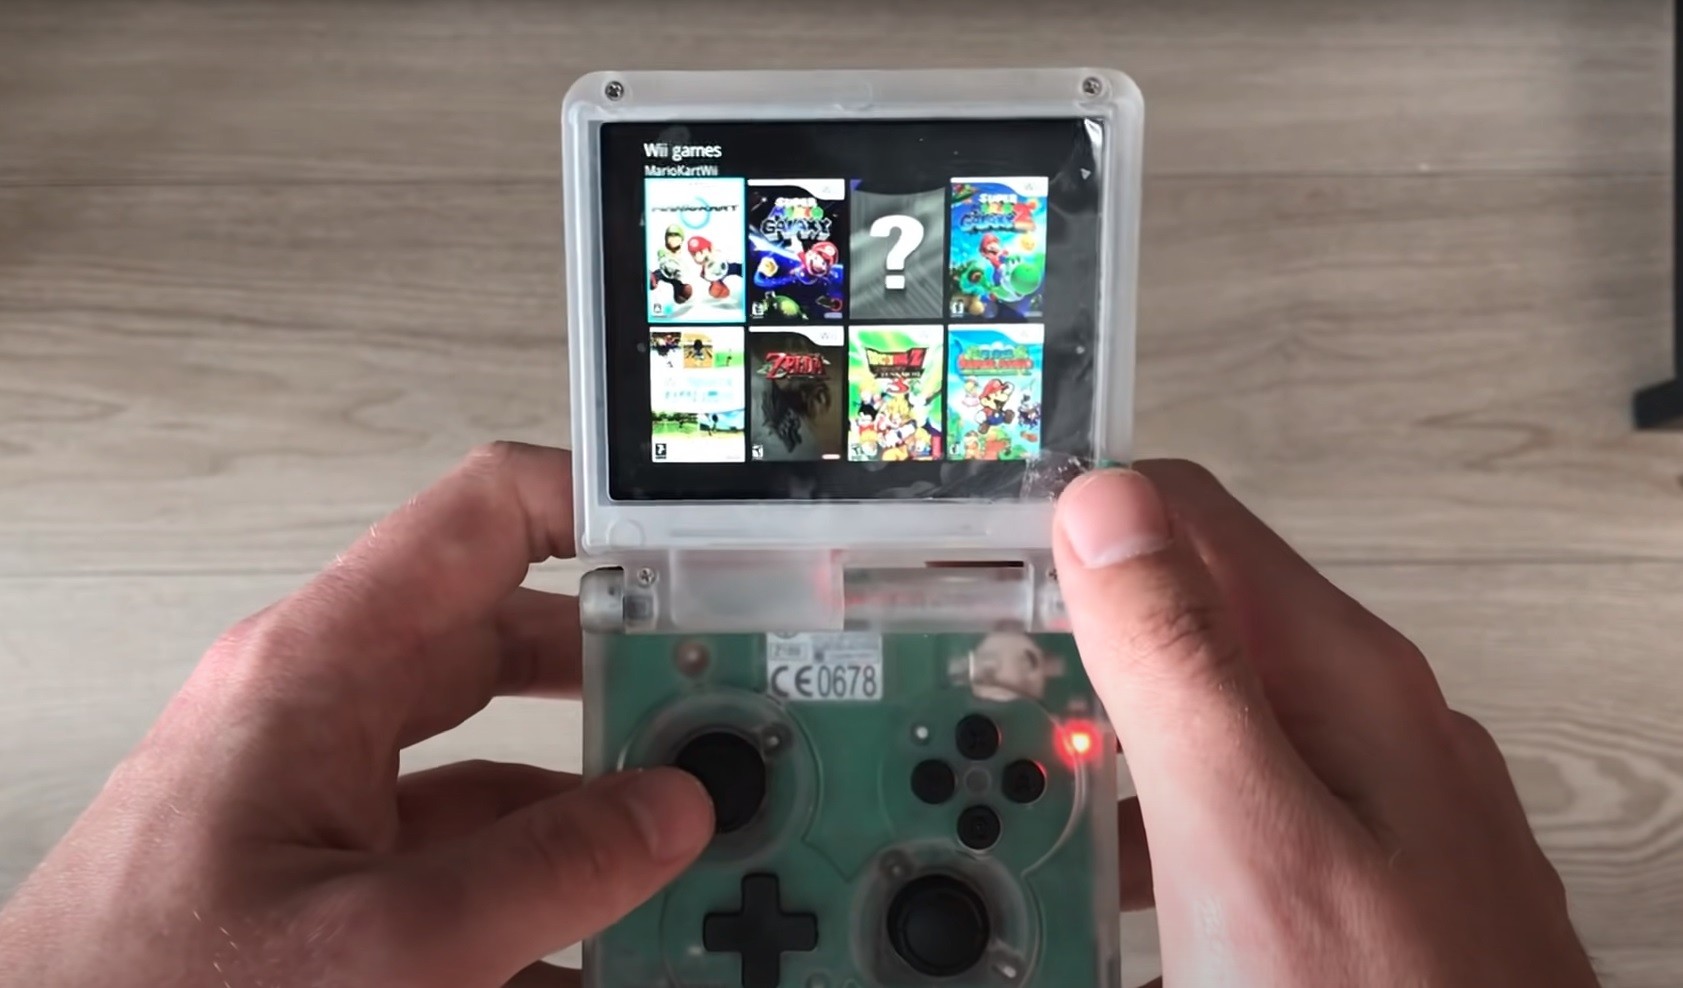 WiiSPII: Man Created a Portable Wii Using a Game Boy Advance SP Console |  GBAtemp.net - The Independent Video Game Community